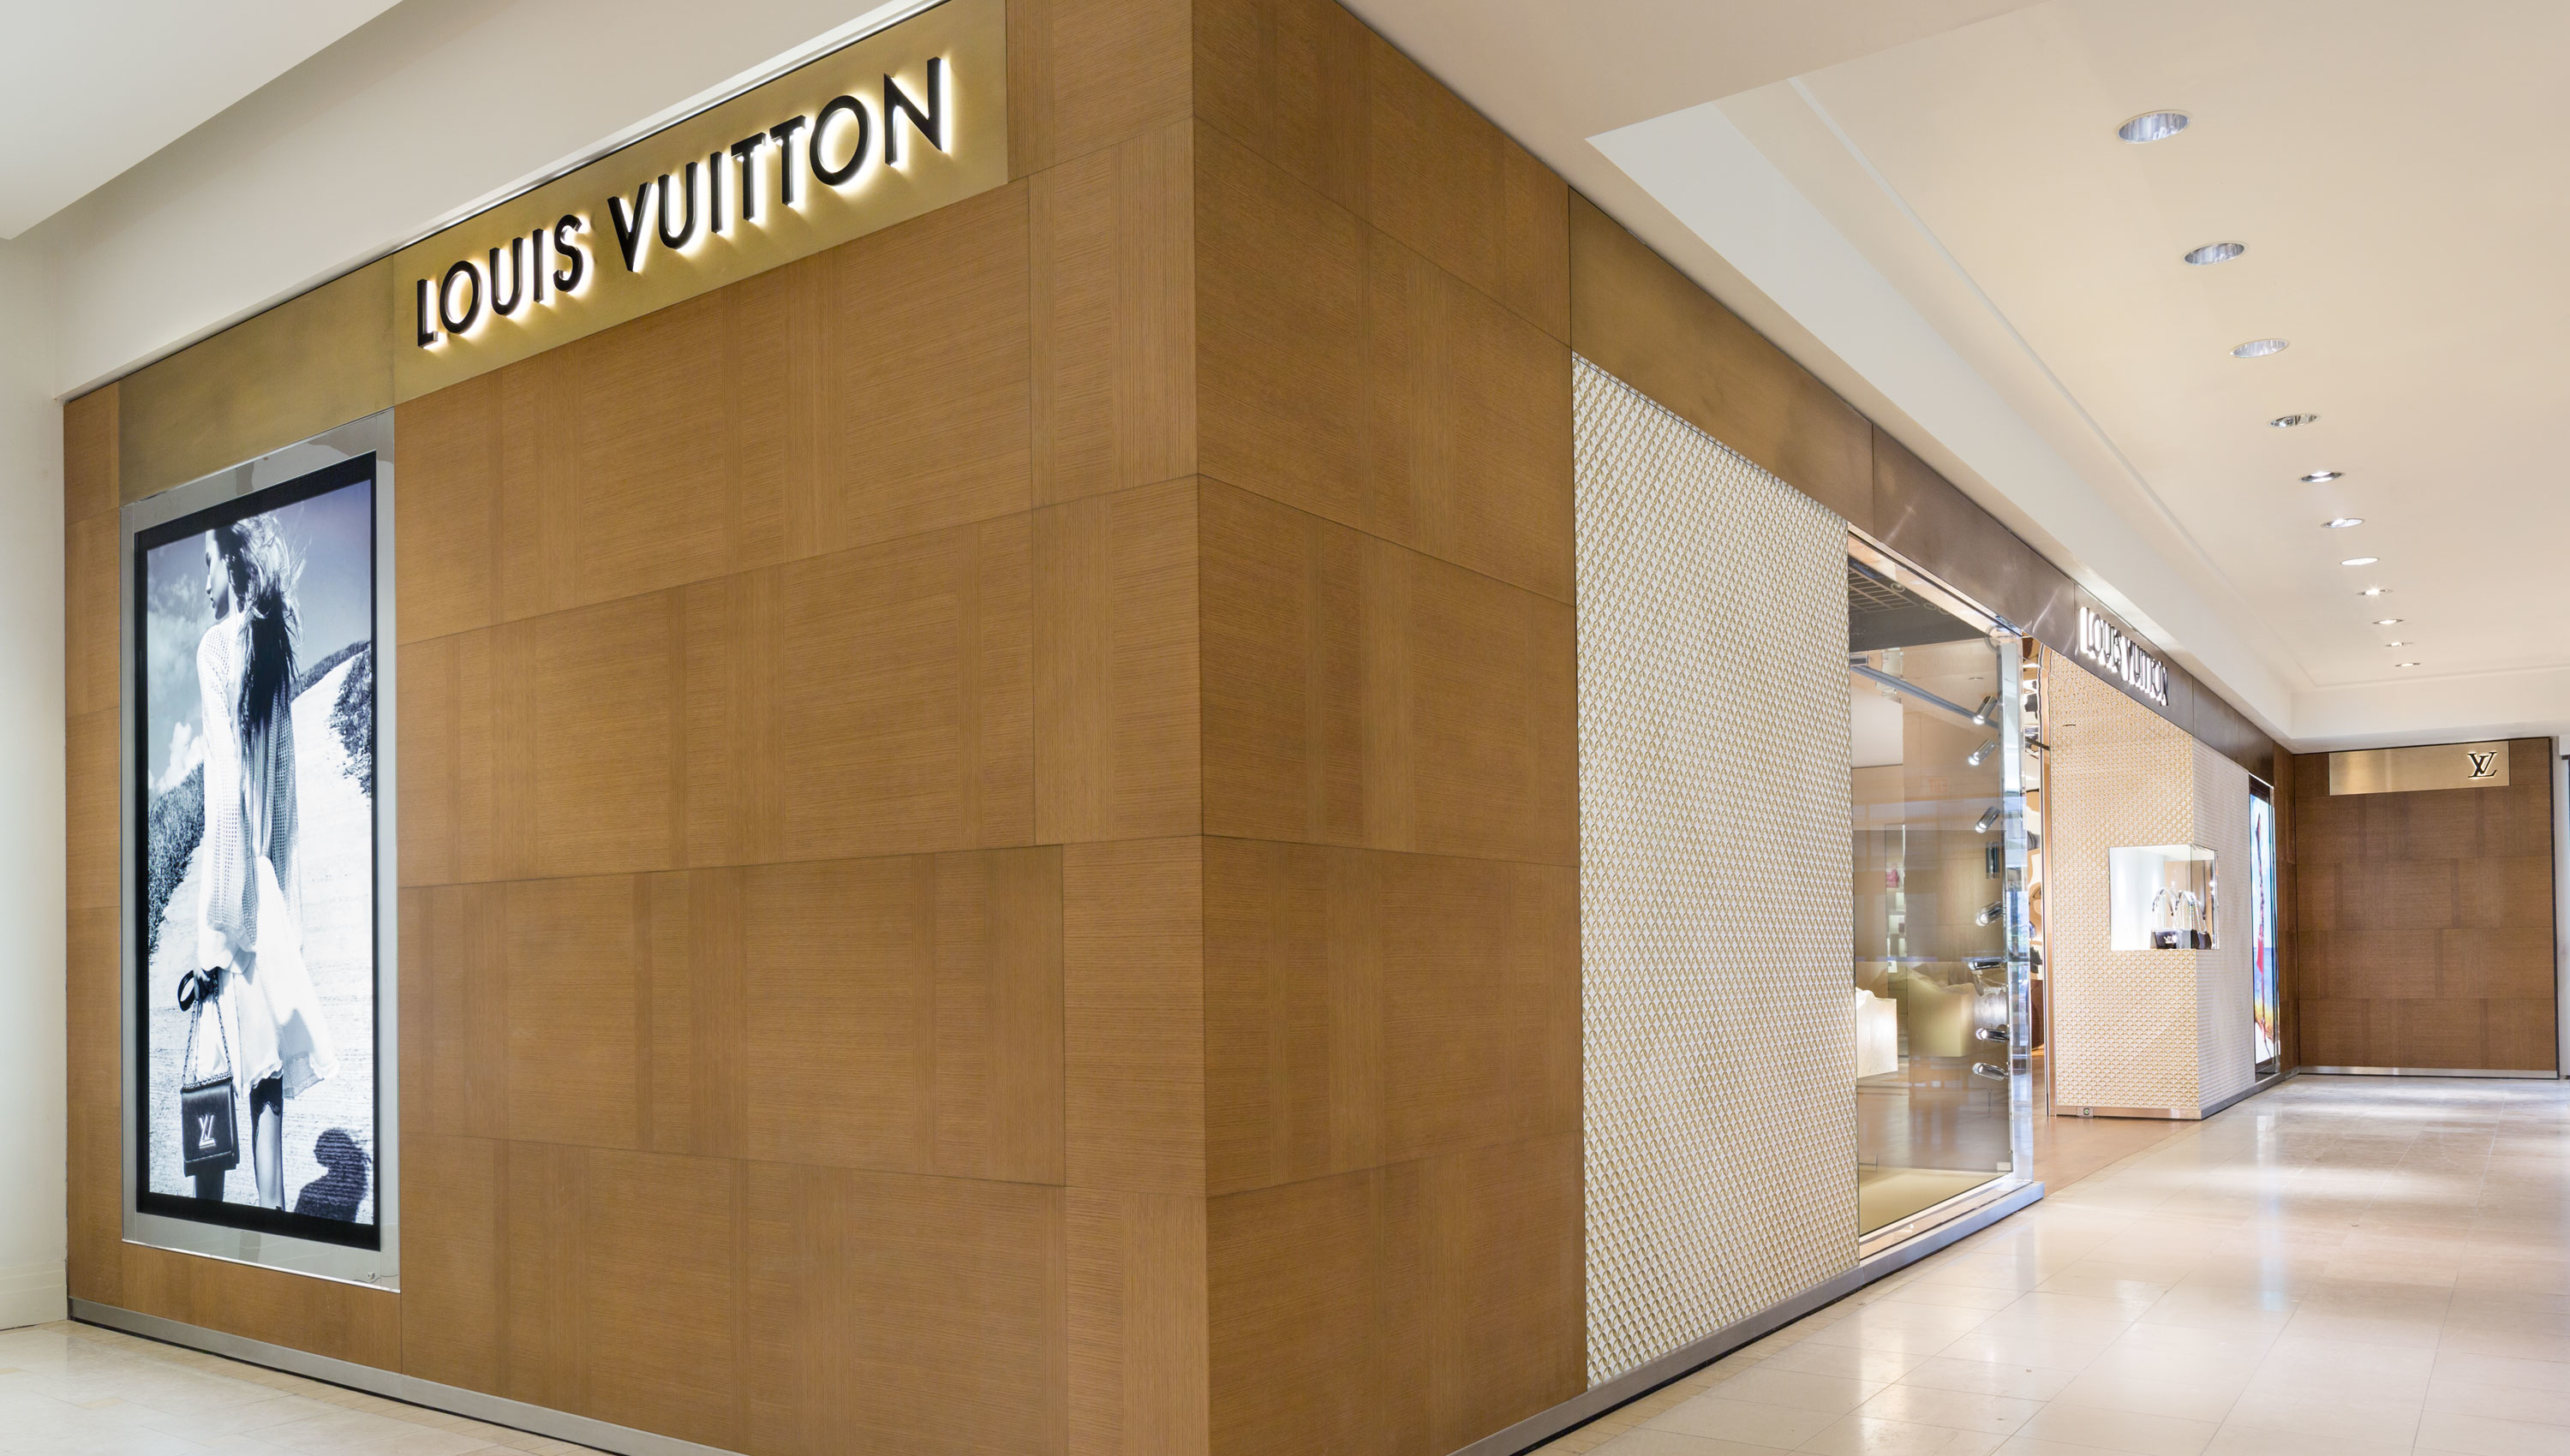 Louis Vuitton Cleveland Saks in Beachwood, OH | Whitepages